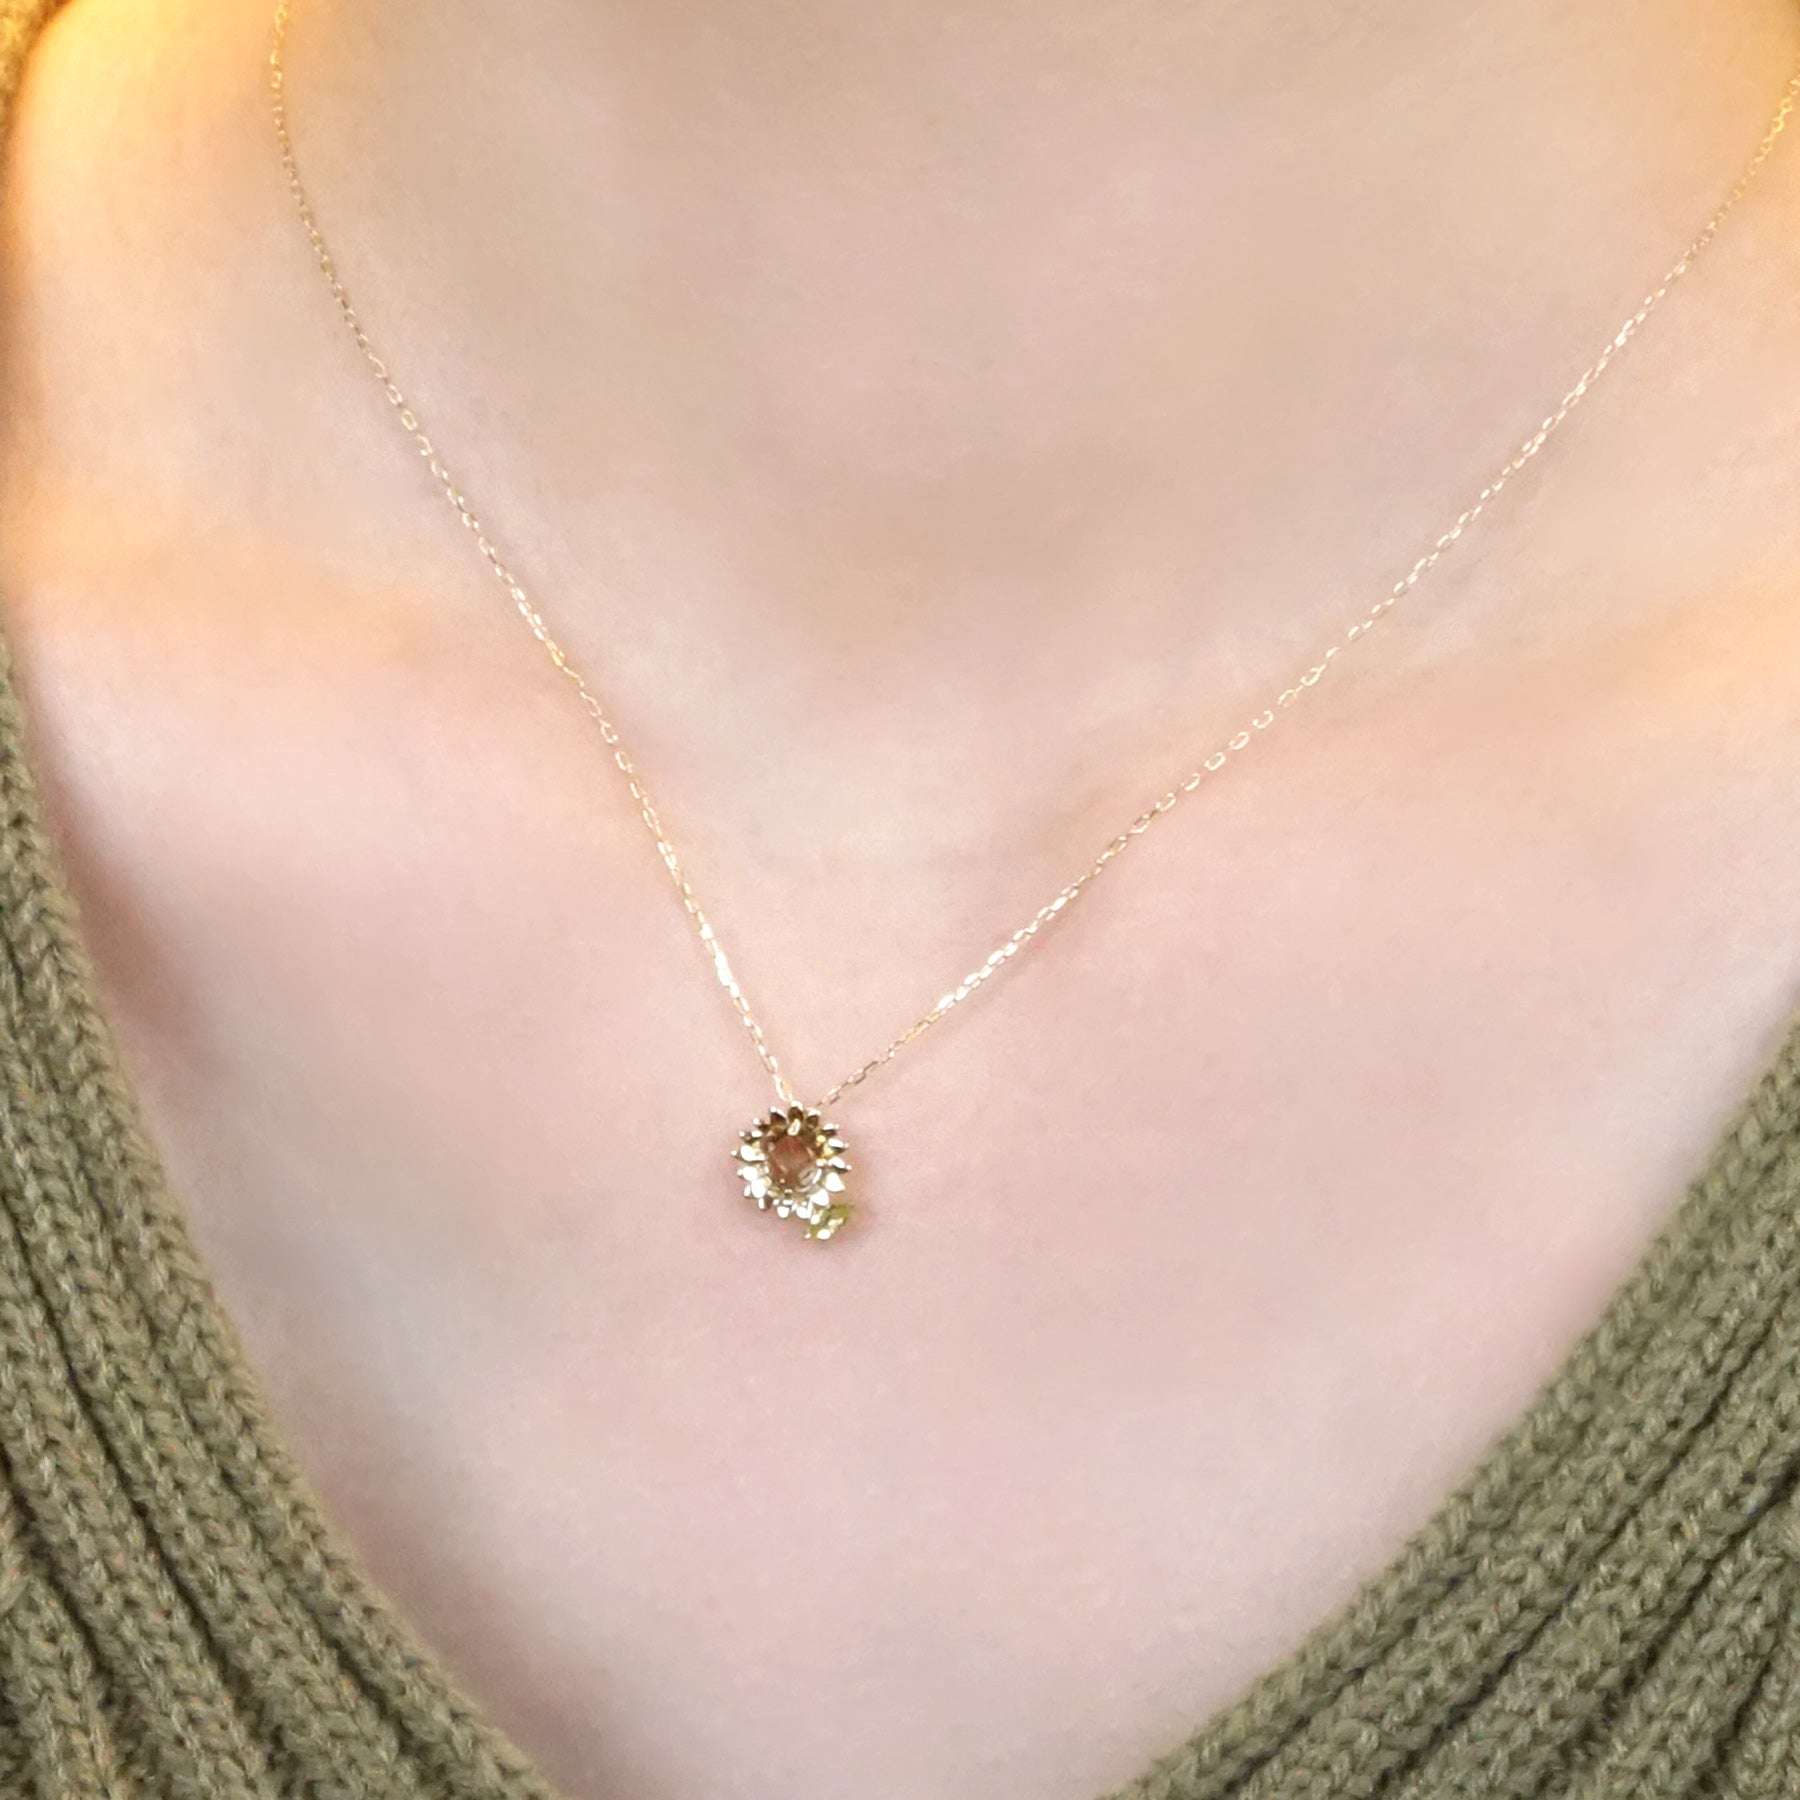 [Birth Flower Jewelry] August Sunflower Necklace - Model Image